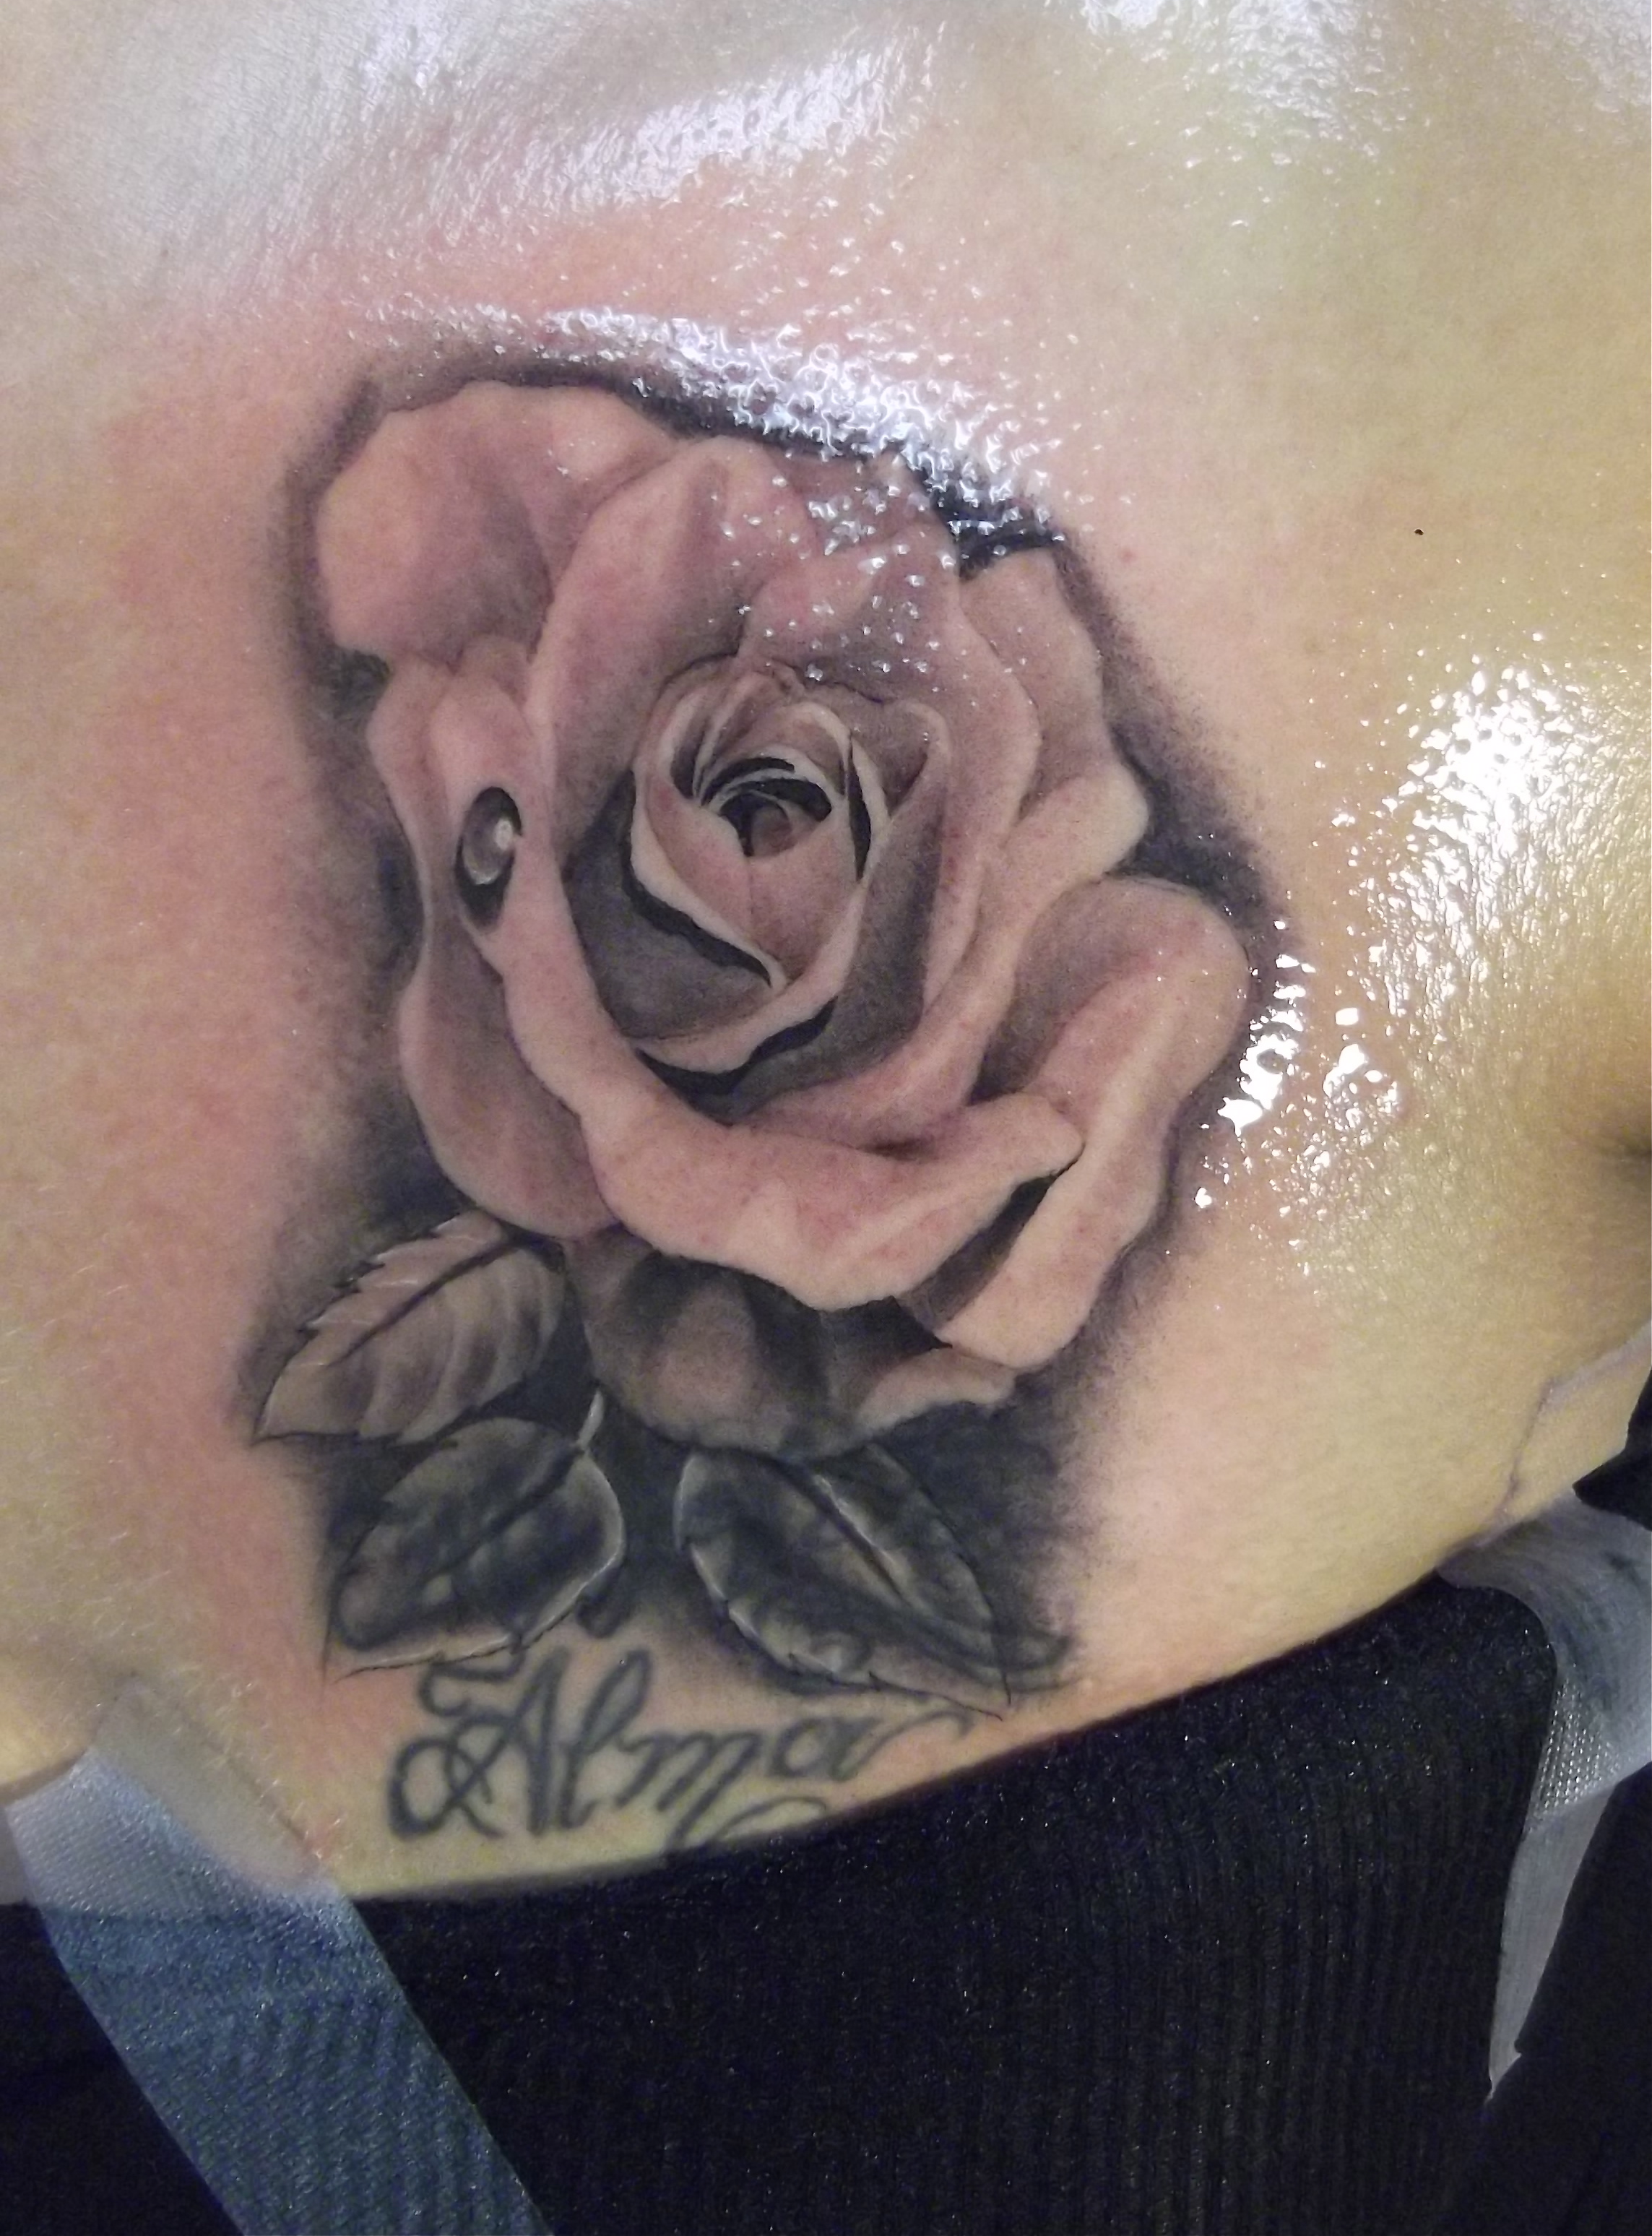 Black And Red Rose Tattoo Cover Up